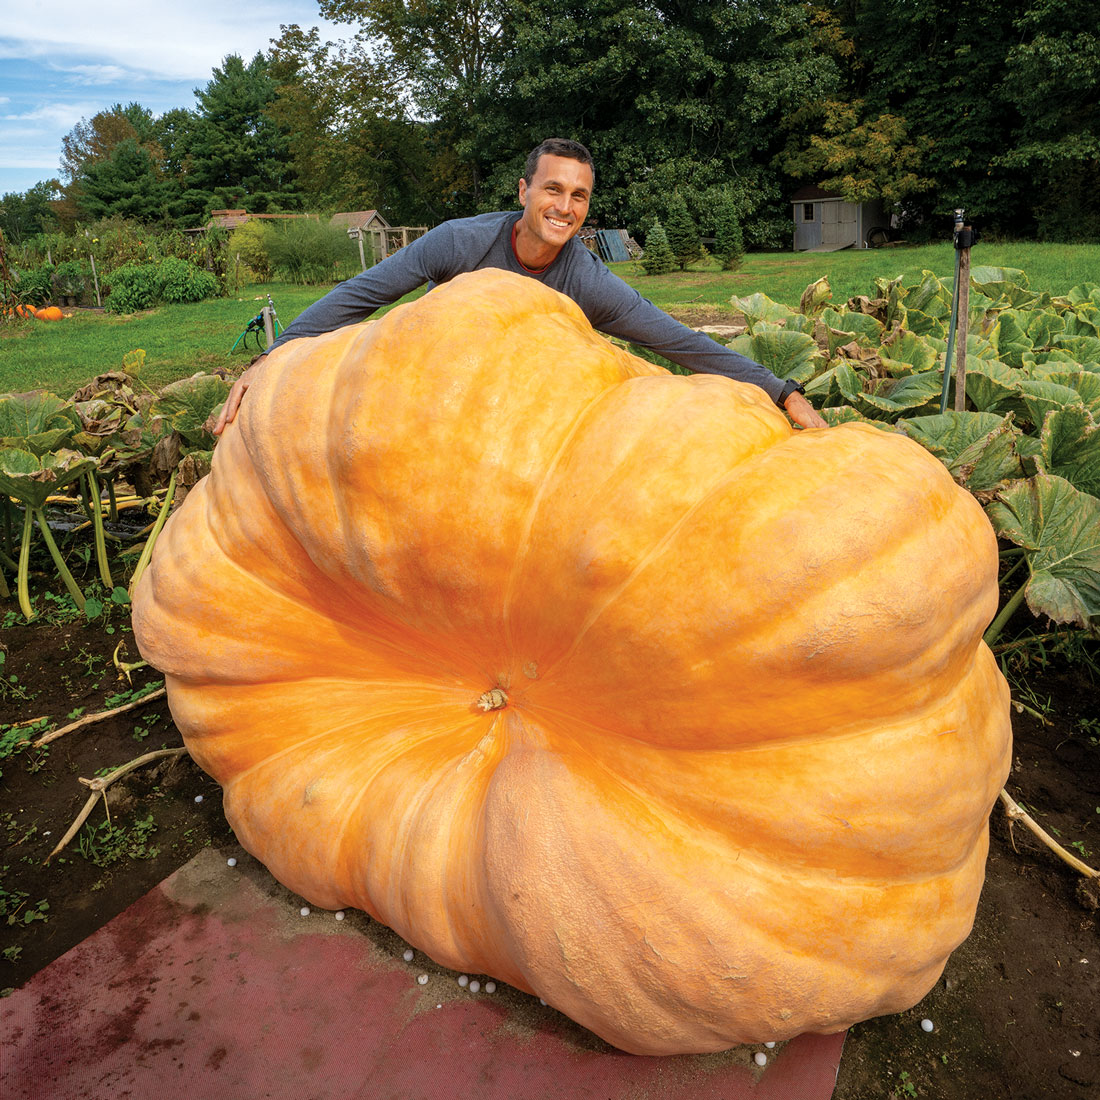 Maine meteorologist Charlie Lopresti with one of his giant pumpkins